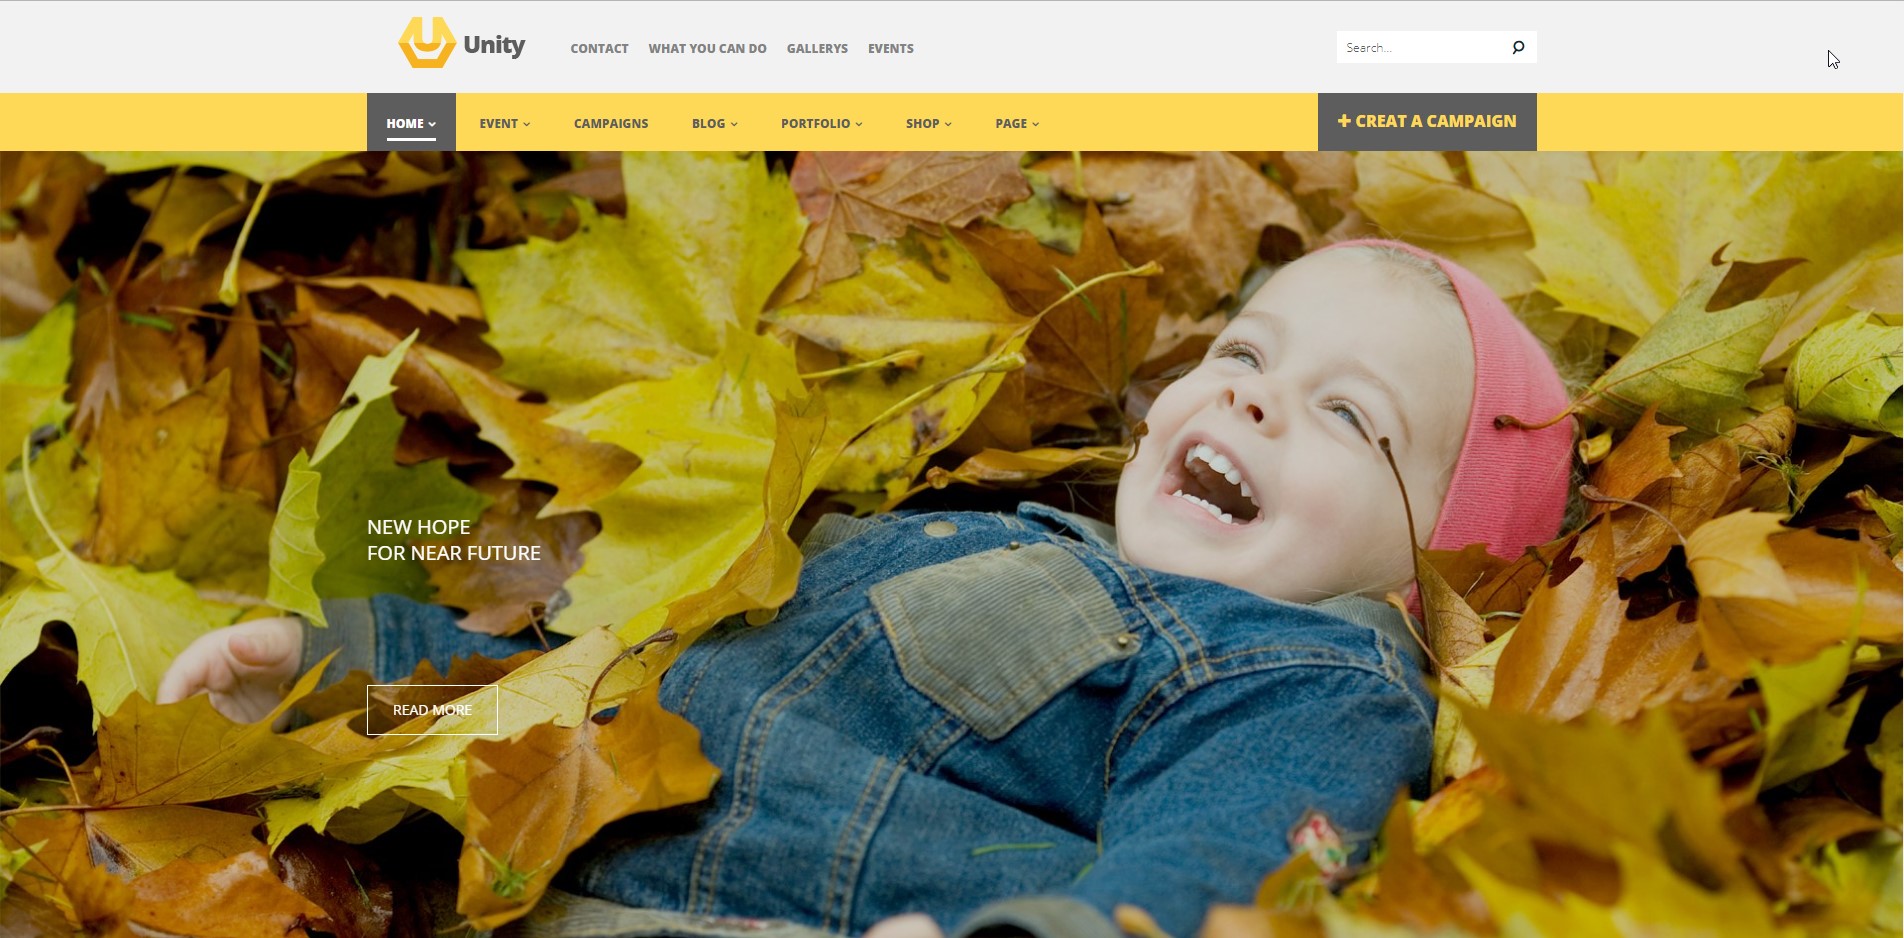 Unity - Charity WordPress Theme Best Non-Profit WordPress Themes for Fundraising and Charit